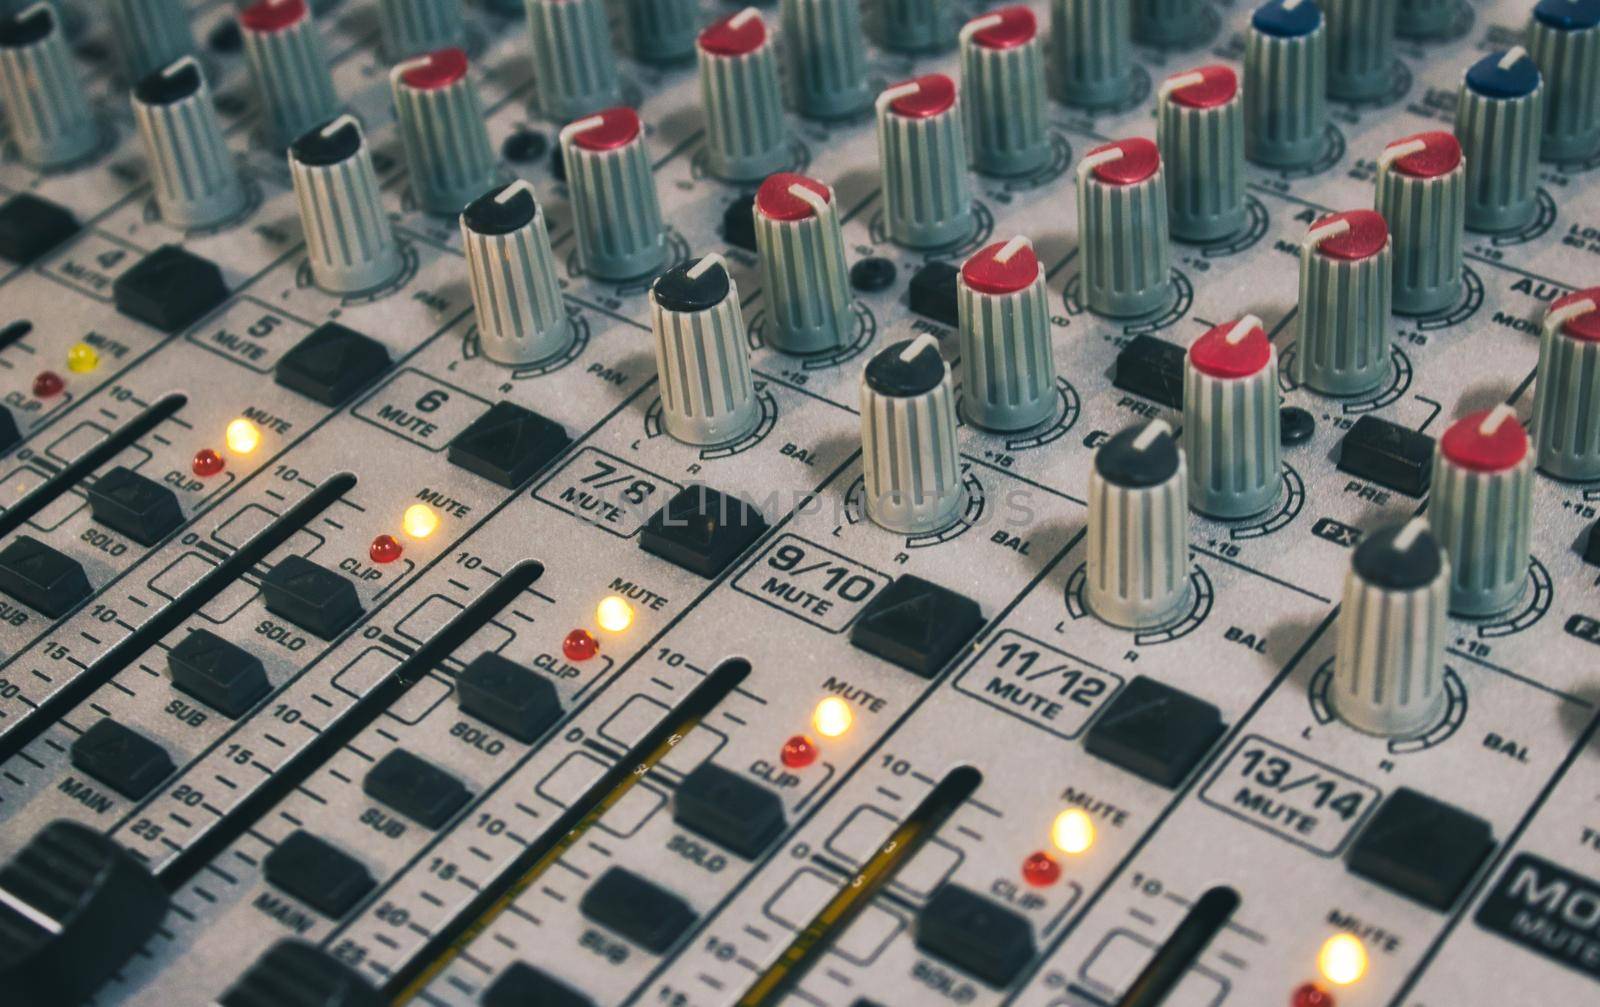 Close-up of audio mixing desk with knobs and sliders